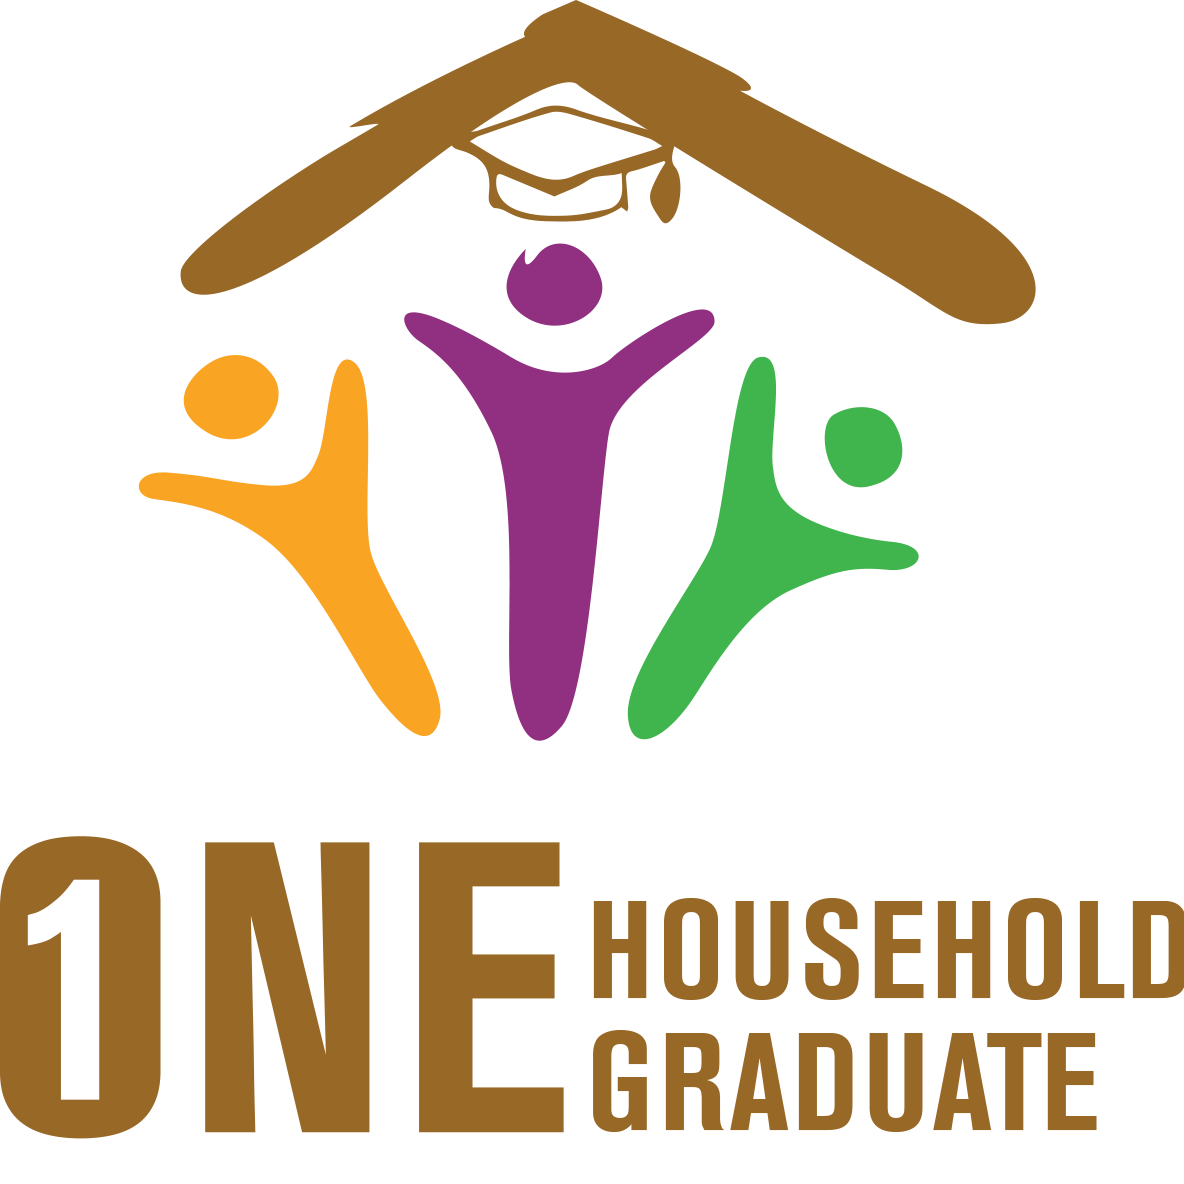 one household one graduate is a campaign aiming at promoting the culture of education and encourages the value of education in communities.